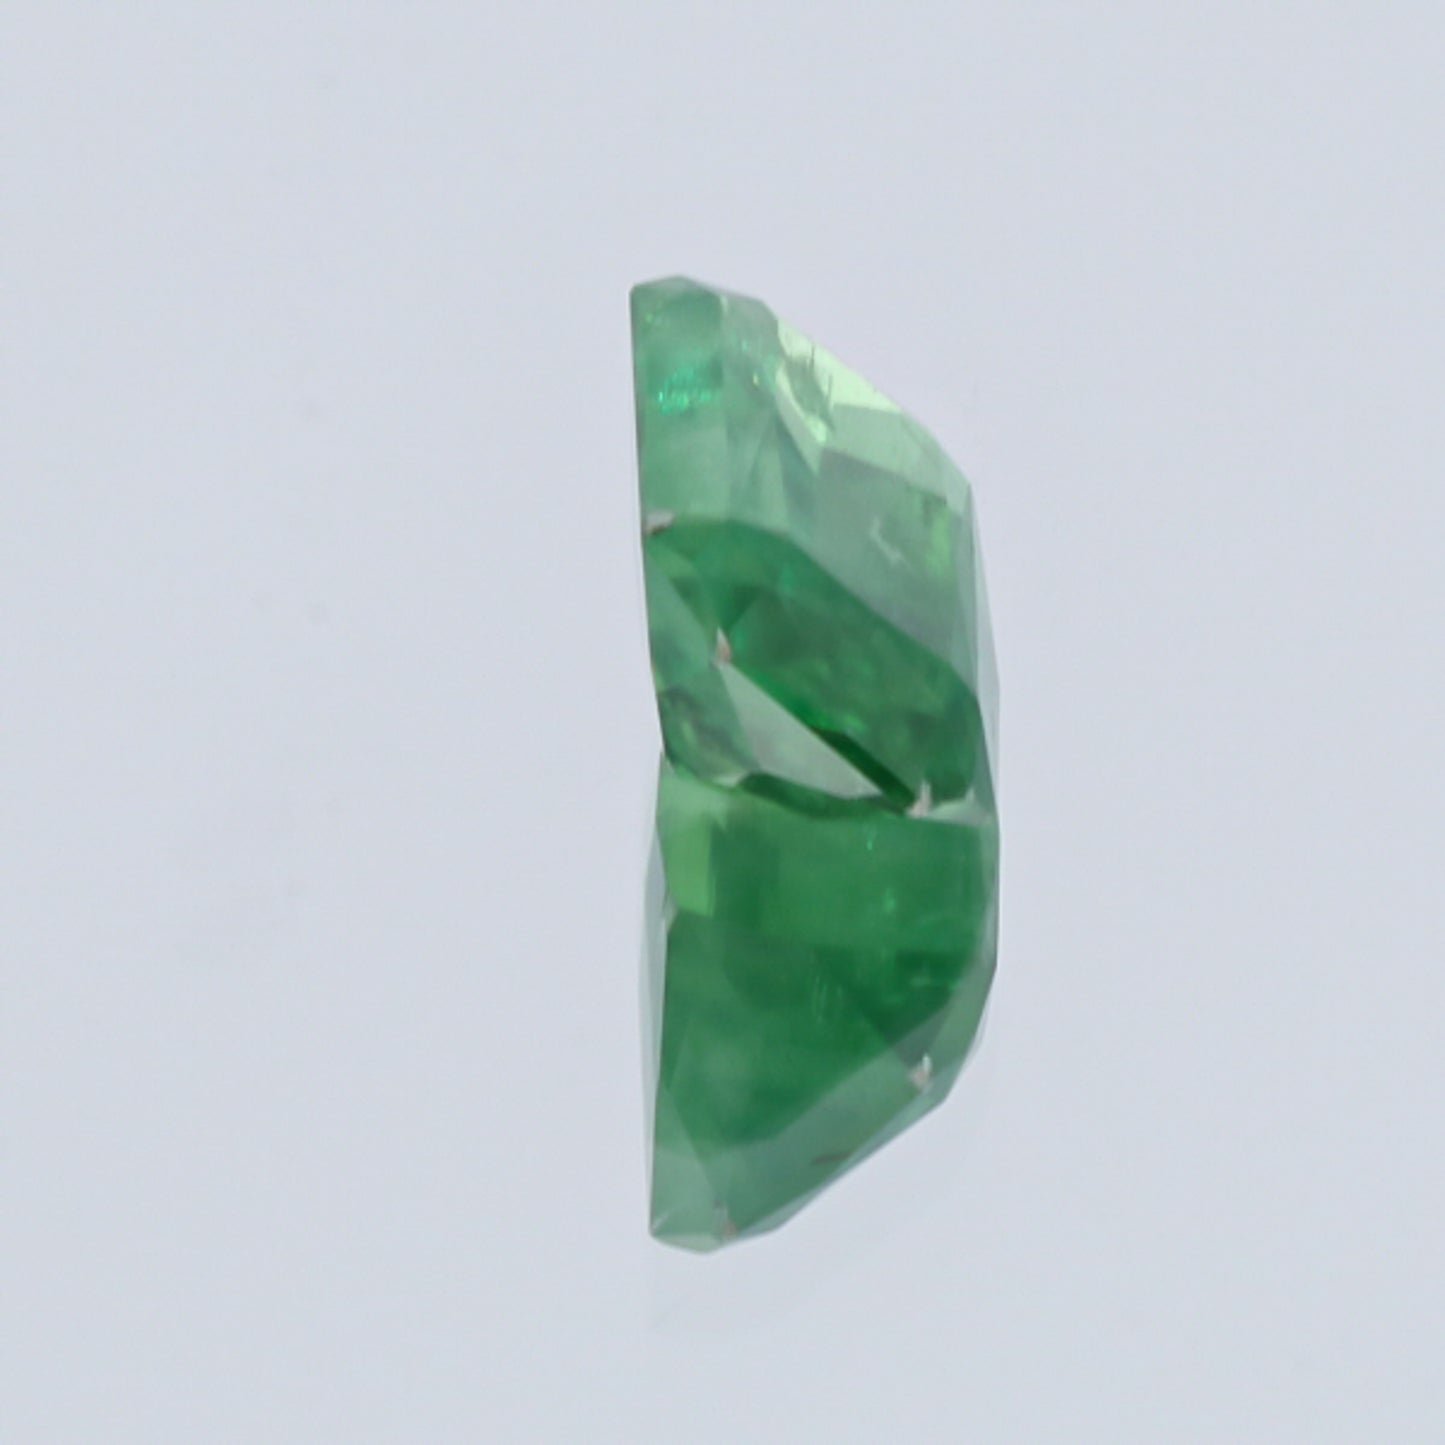 Load image into Gallery viewer, Natural Unheated Rare Green Kyanite Emerald Shape 10.98 Carats With GRS Report
